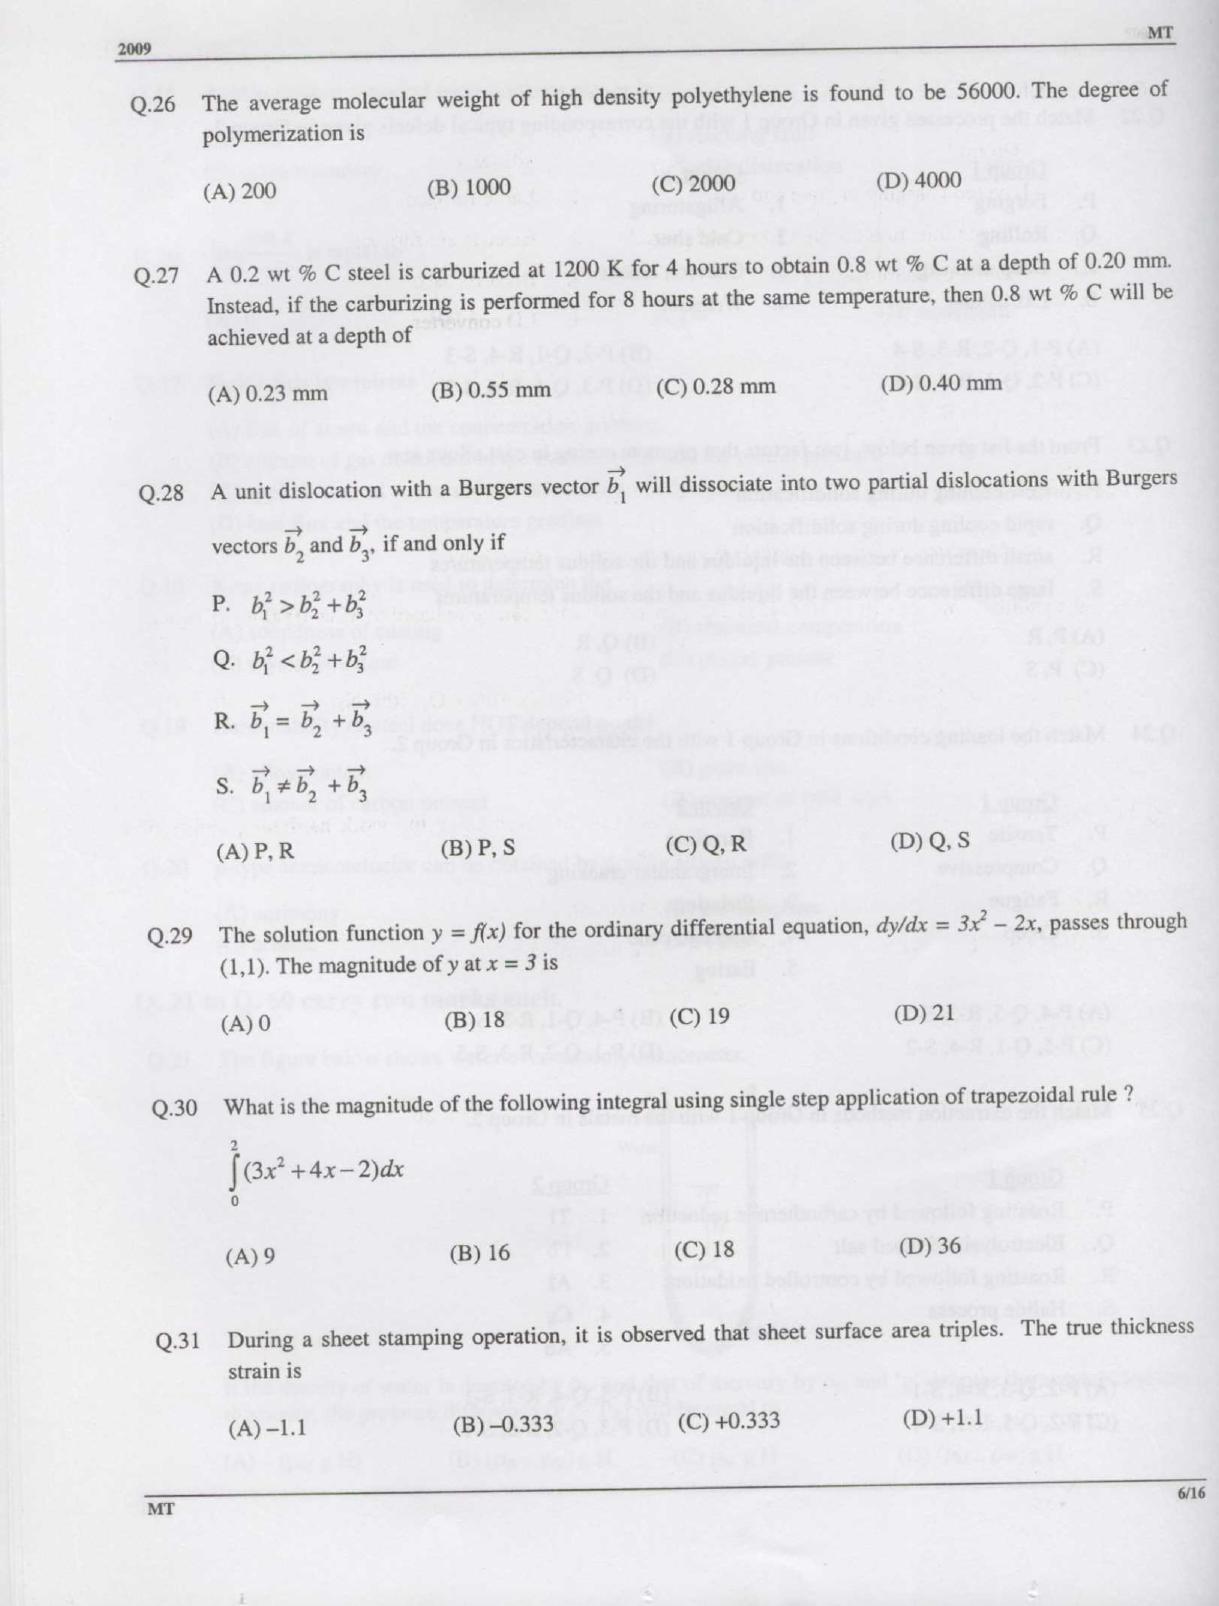 GATE 2009 Metallurgical Engineering (MT) Question Paper with Answer Key - Page 6